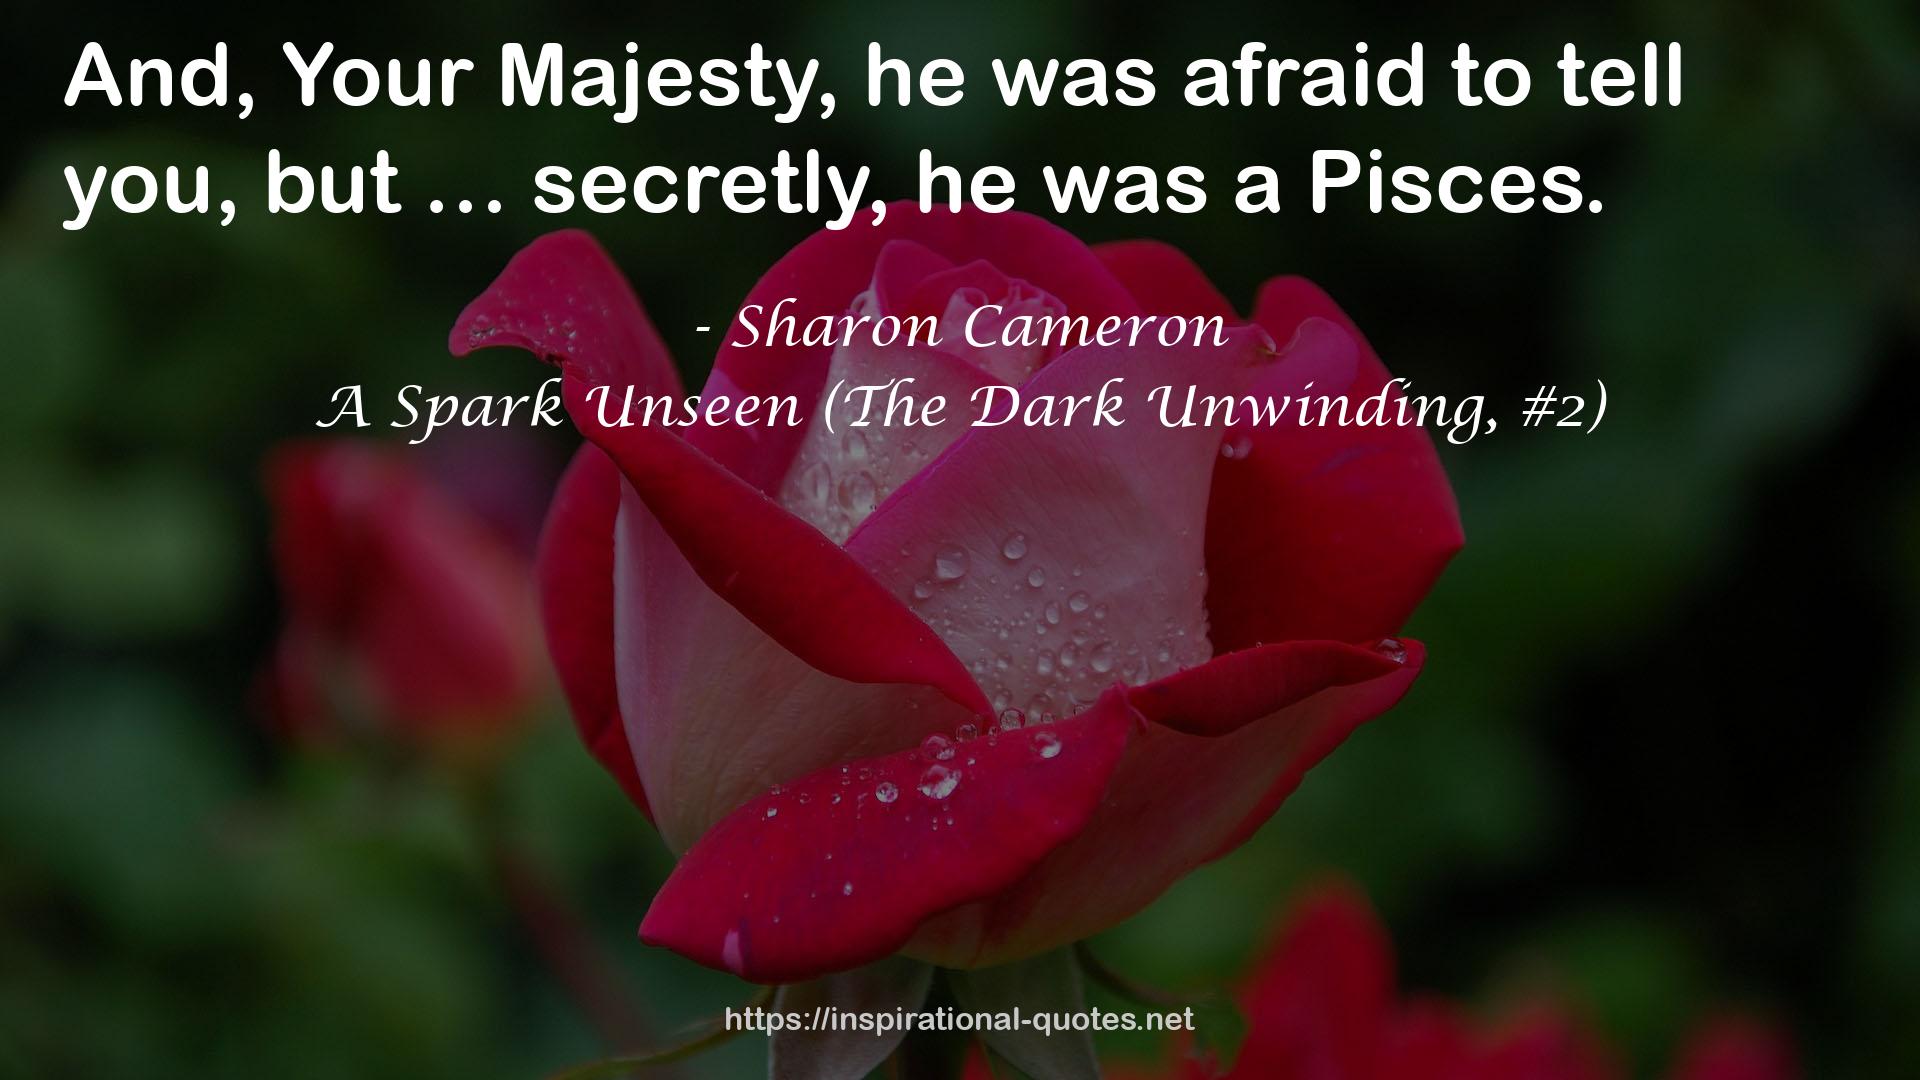 A Spark Unseen (The Dark Unwinding, #2) QUOTES